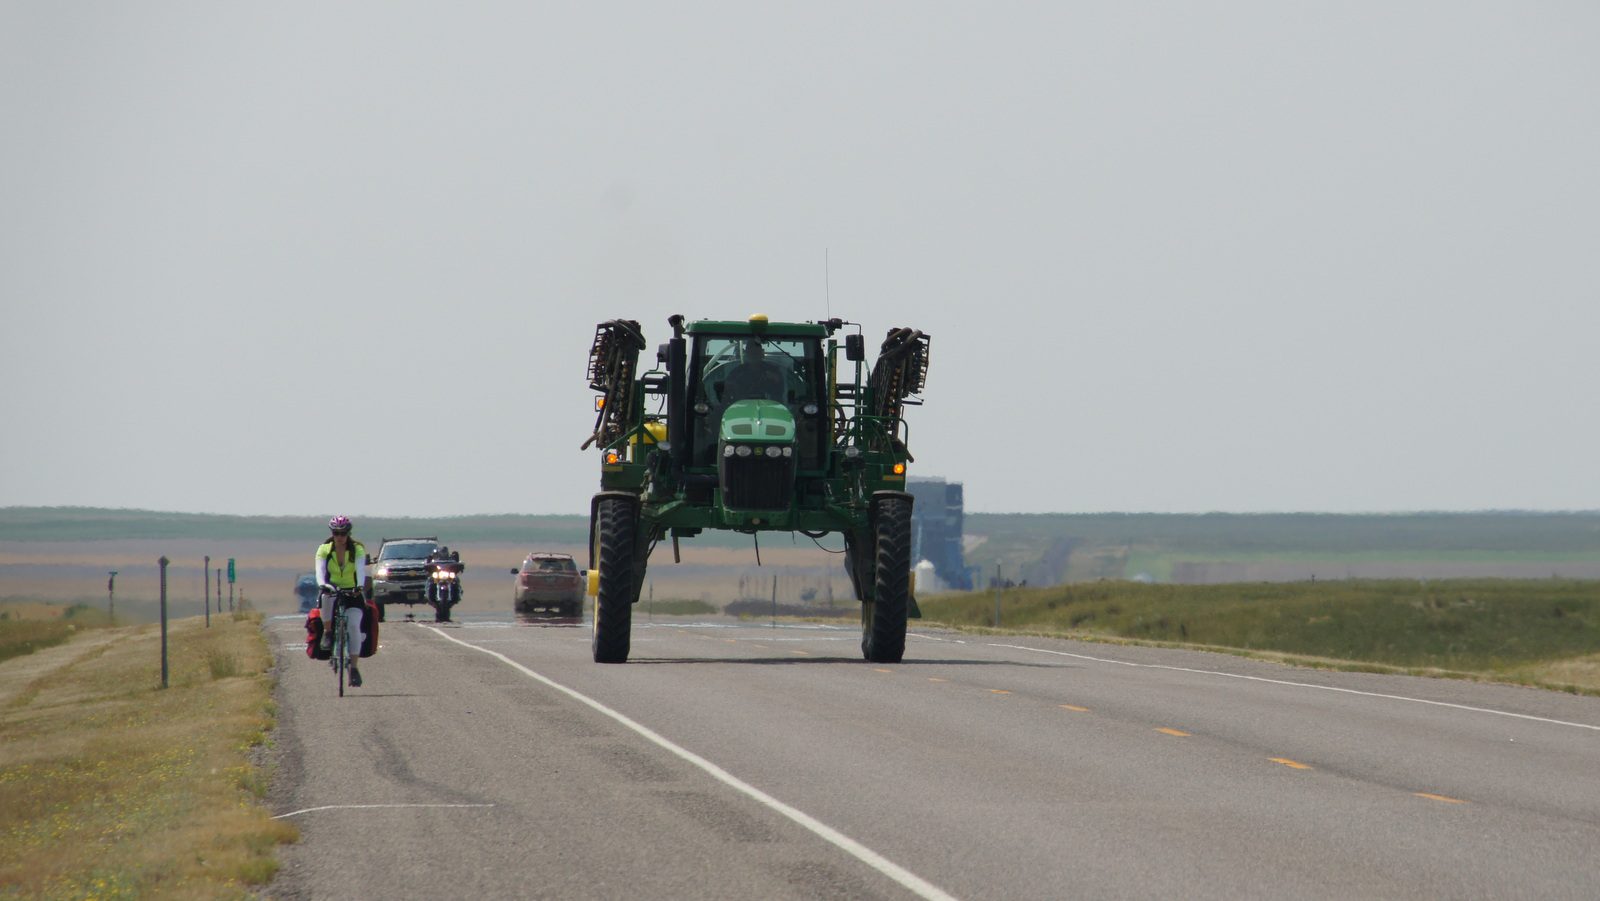 Chelsea and a giant piece of farm machinery share Highway 2 in northern Montana.